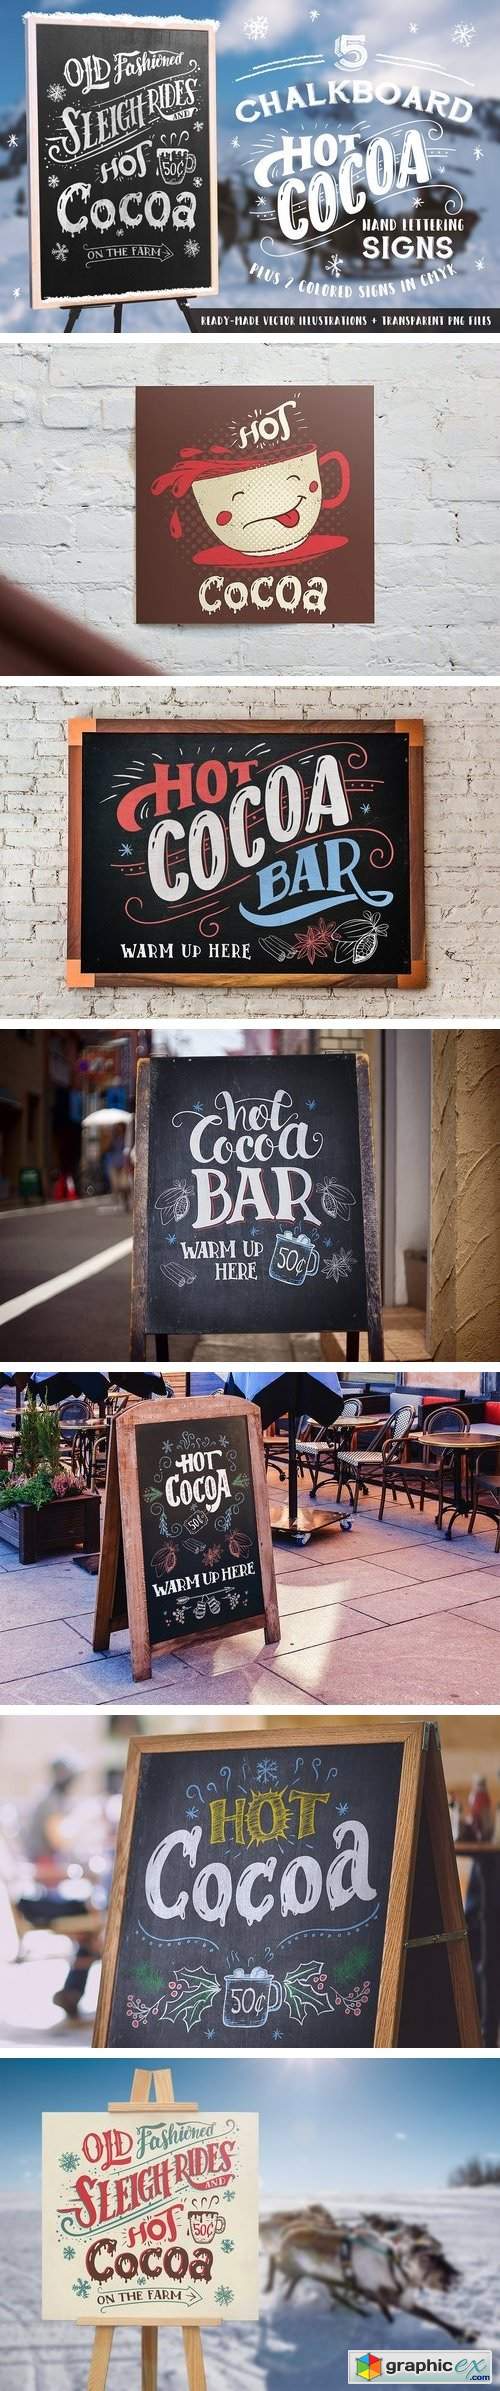 Hot Cocoa Chalkboard Signs Set